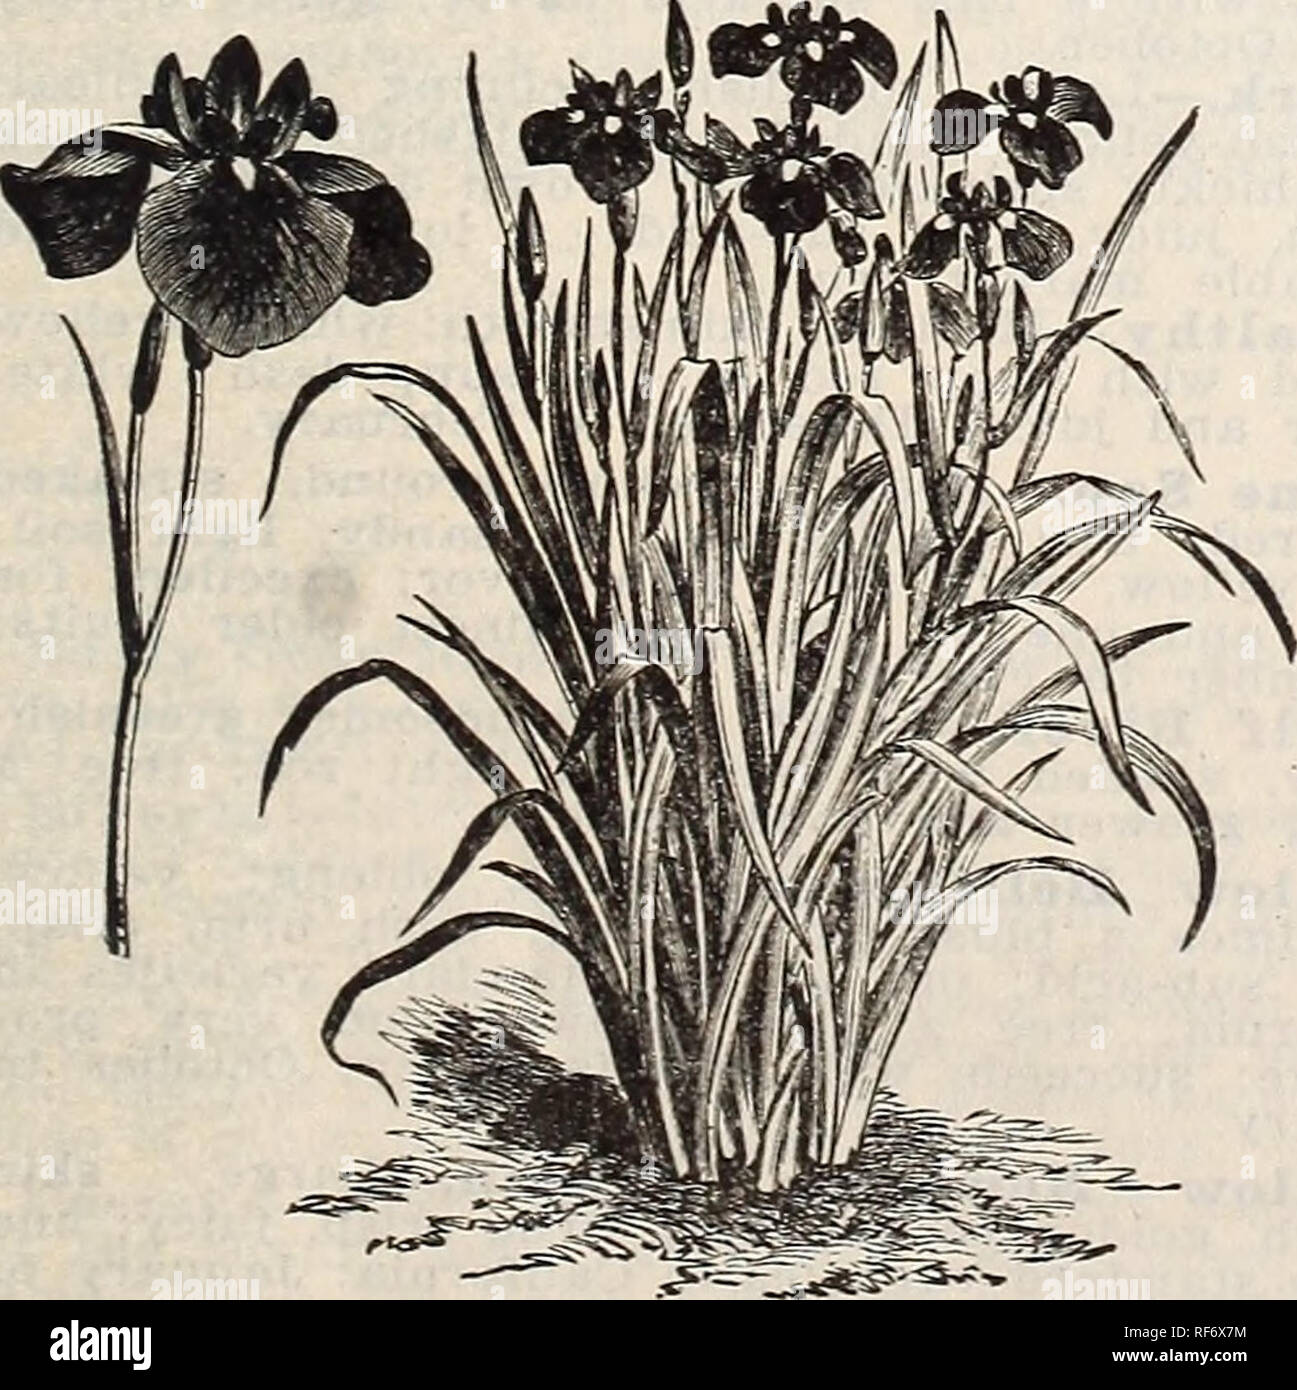 . Annual catalogue no. 19 : for the season 1902. Nursery stock Oregon Portland Catalogs; Vegetables Seeds Catalogs; Grasses Seeds Catalogs; Flowers Seeds Catalogs; Plants, Ornamental Catalogs; Gardening Equipment and supplies Catalogs. LiLruM Atjrattjm. Water Eily. (Nymphea white. 25c. ea. odorata). postpaid.. New Large=Flowered Japan Iris. (IRIS KiEMPFERI). Irises are of easy culture,requiring very little attention after once being planted. The) do best in a light, rich, sandy soil, and in a sunny situation. Good drainage ^s very important. Some of them send up 10 or 12 flower spikes 3 feet h Stock Photo